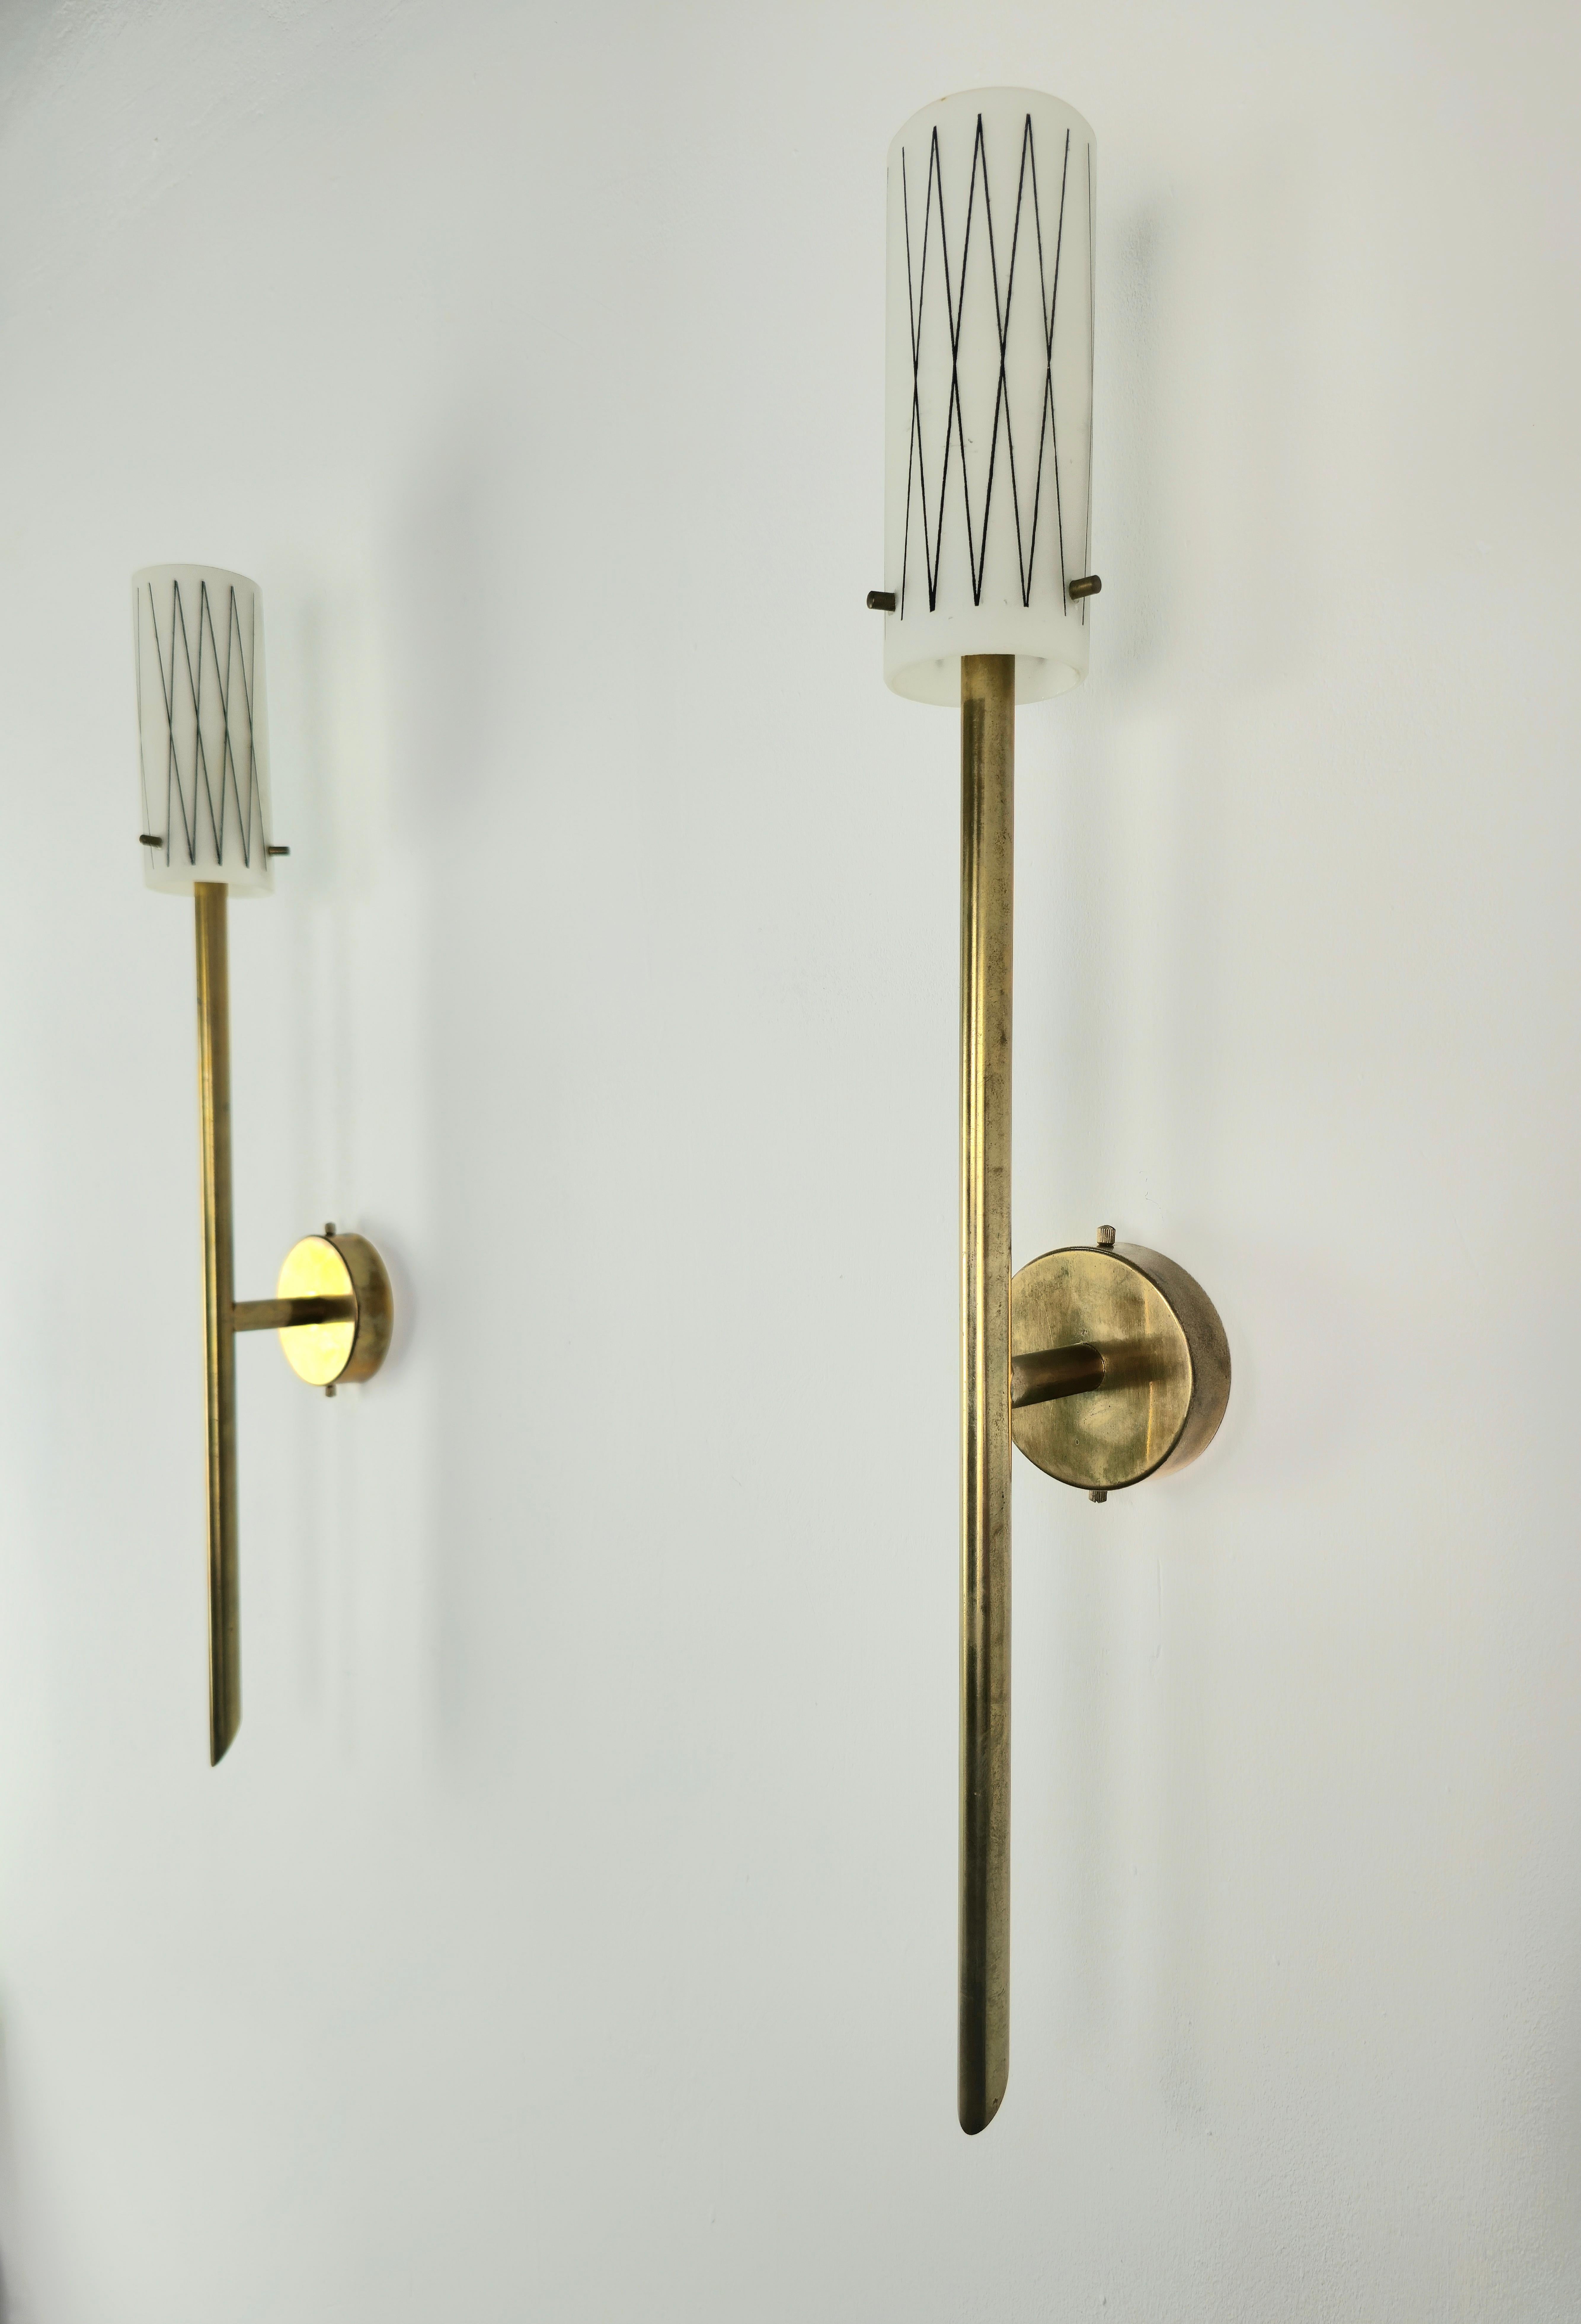 Pair of Wall Lights Sconces Brass Opaline Glass Midcentury Italian Design 1950s  For Sale 5